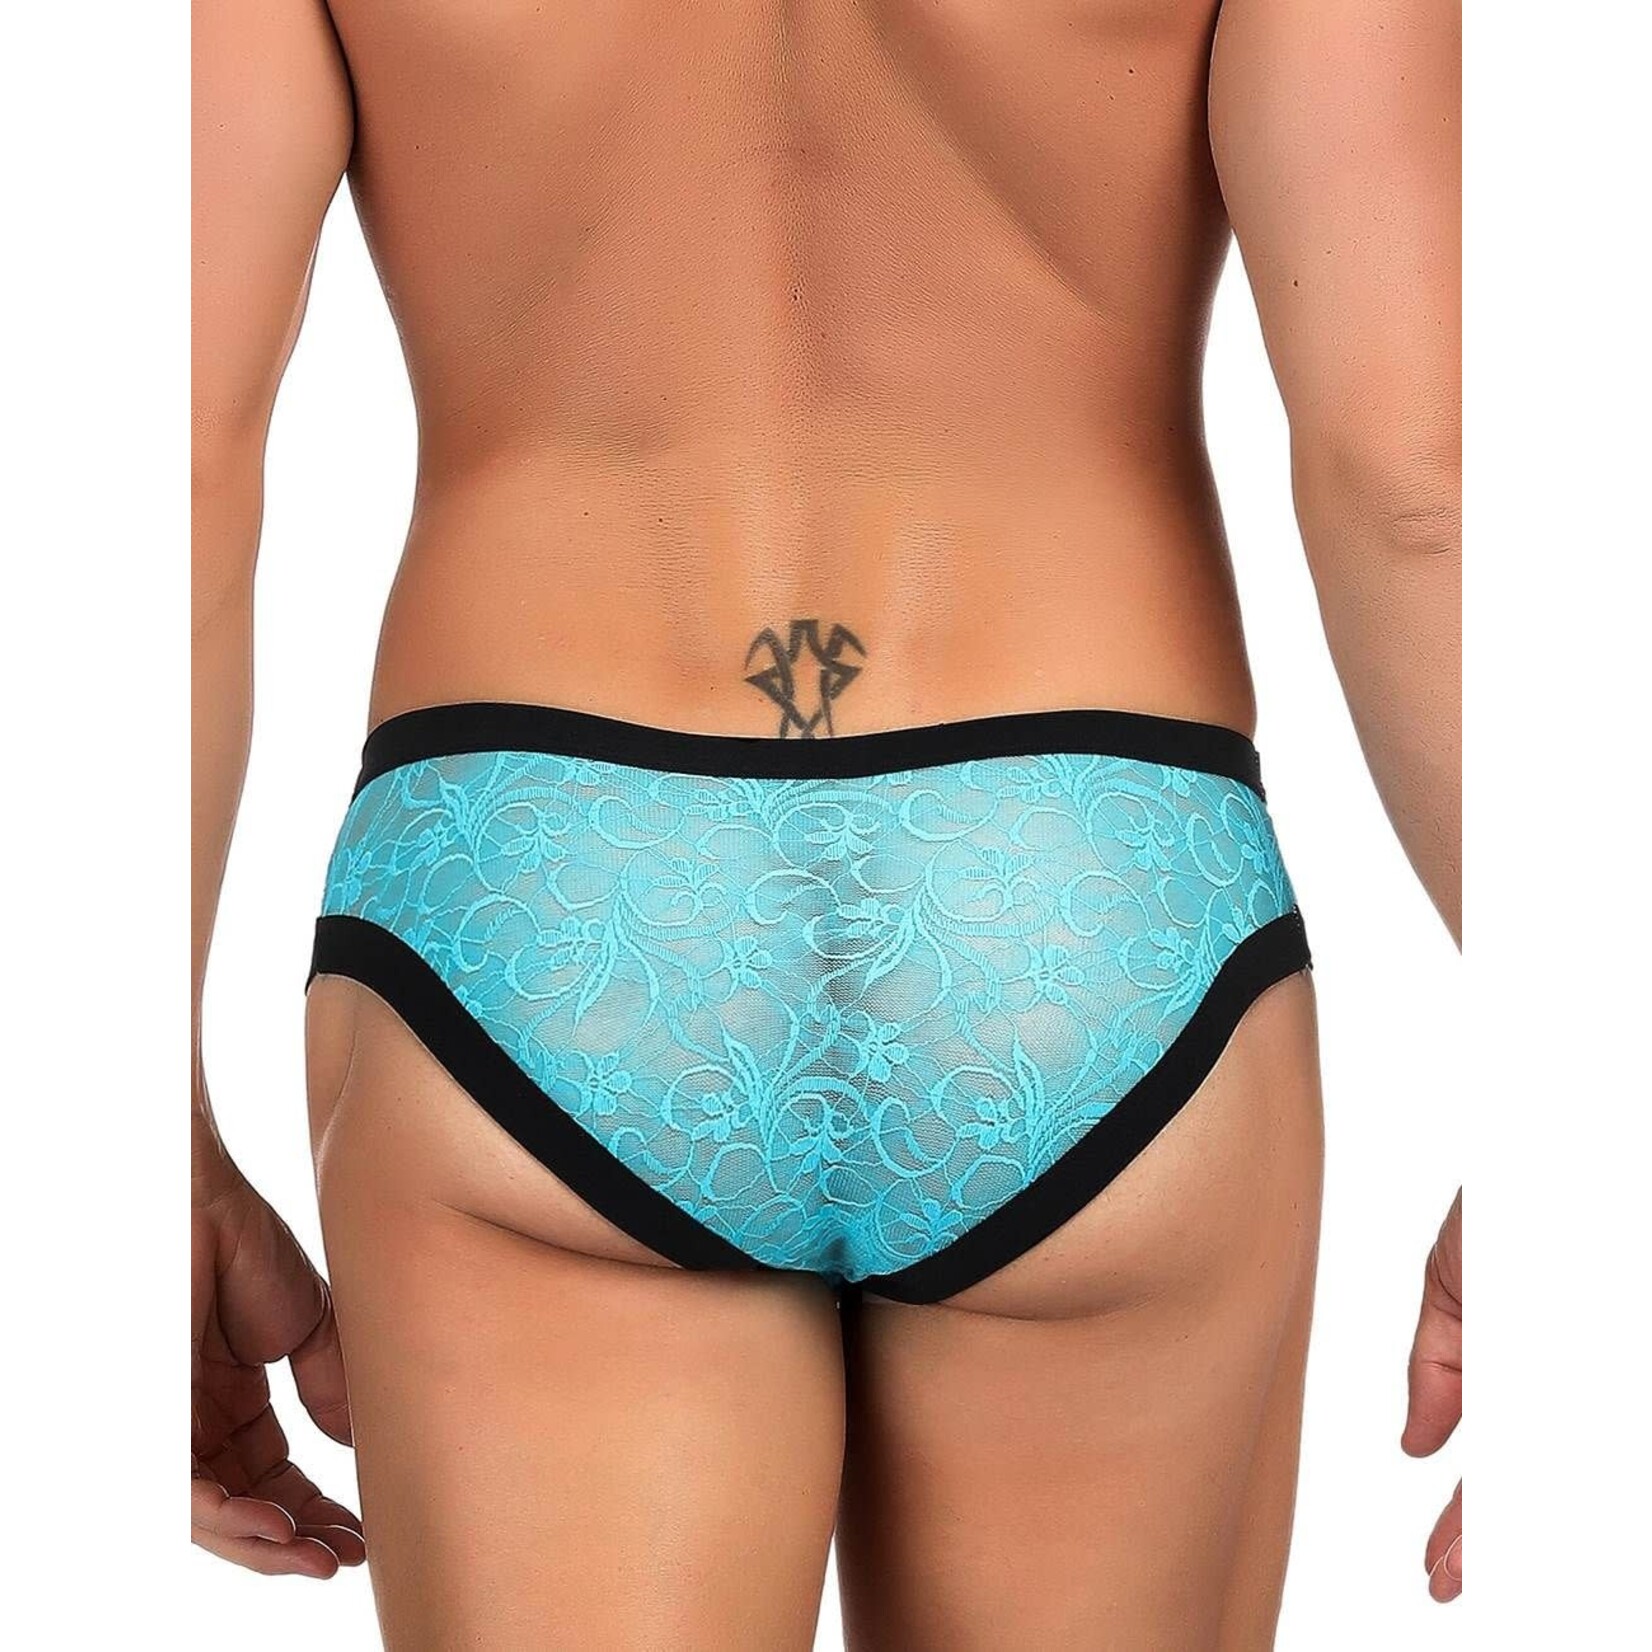 OH YEAH! -  SEXY BLUE LACE PANTY FOR MEN L